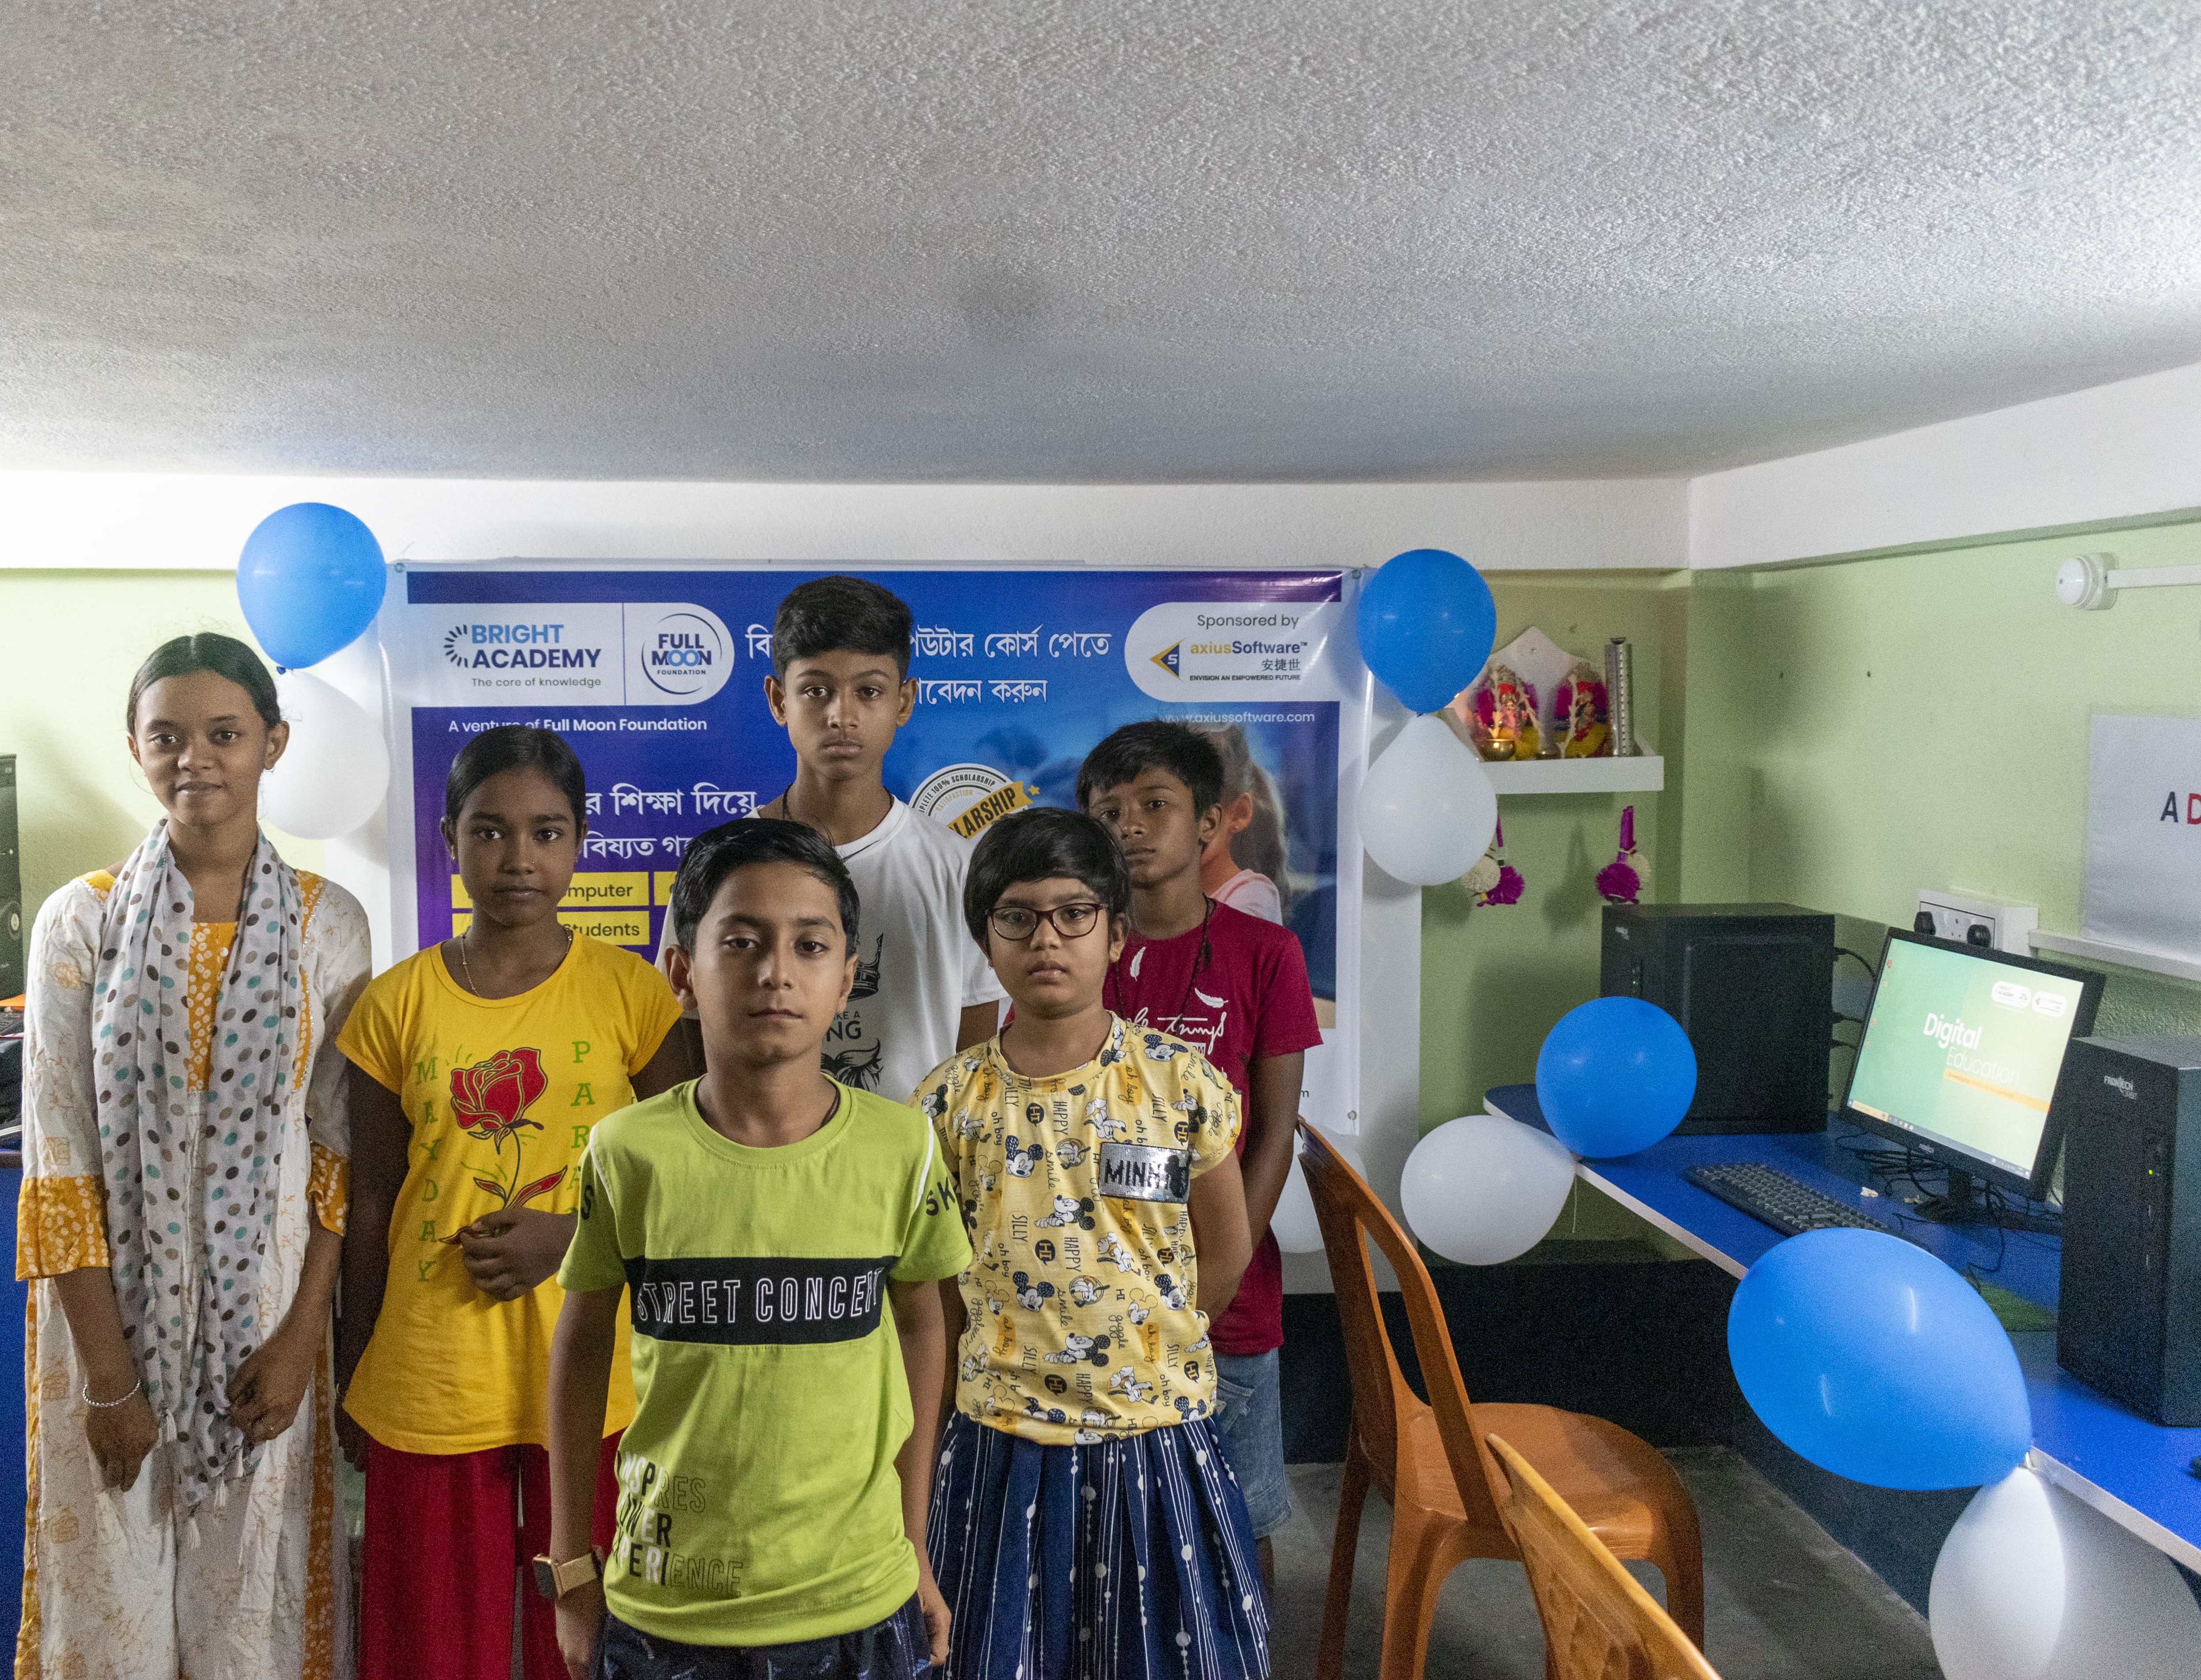 axiusSoftware-collaborates-with-Local-NGO-to-Launch-Free-Computer-Education-for-Needy-Children-in-Kolkata,-India